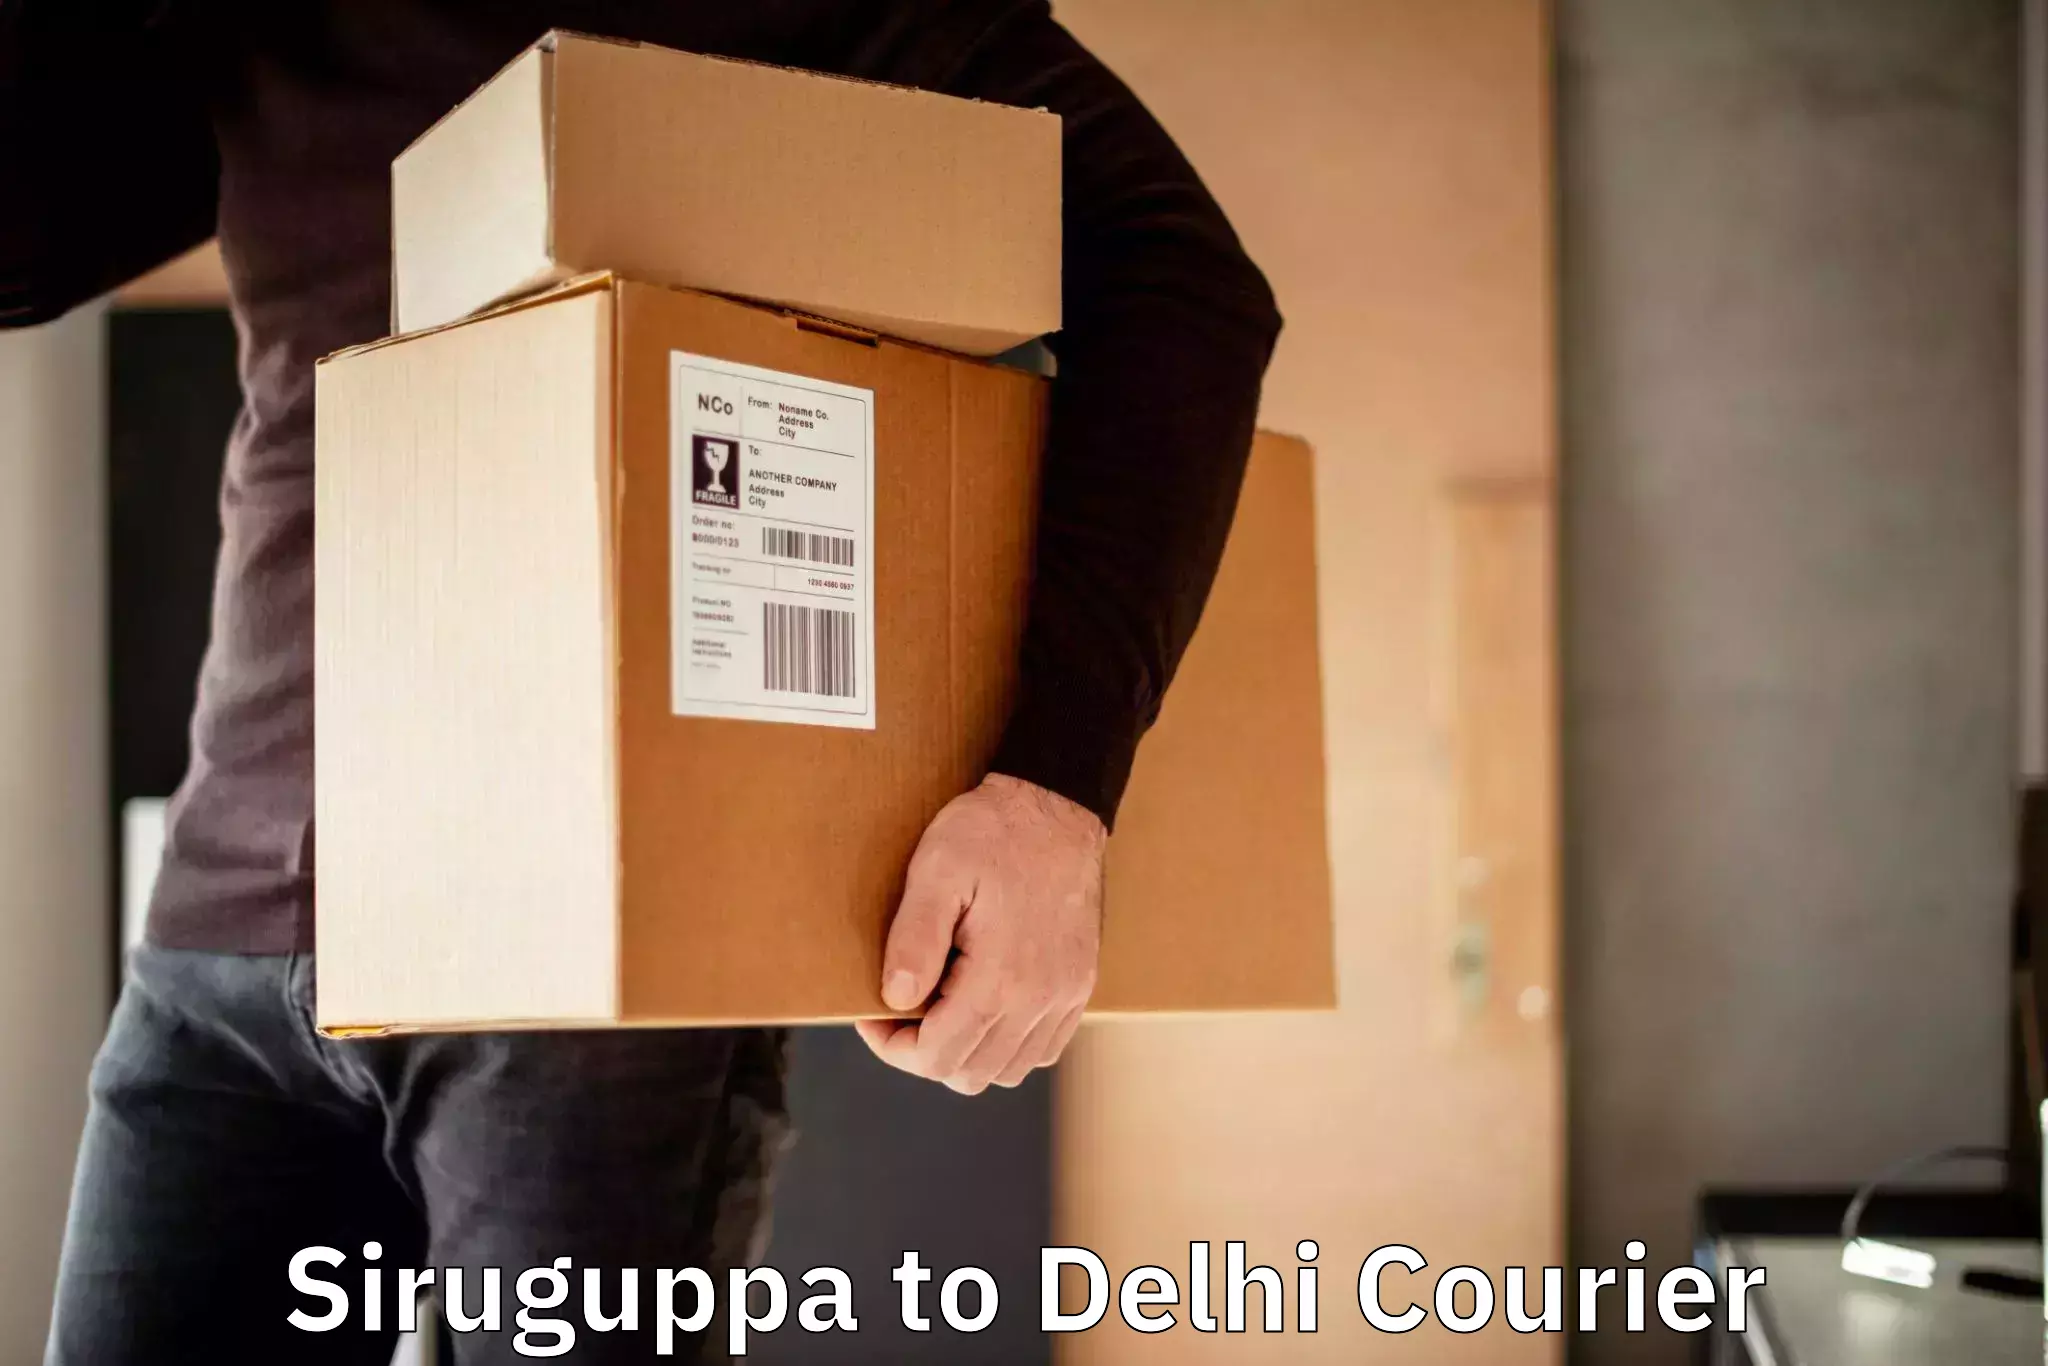 Efficient parcel service Siruguppa to Lodhi Road